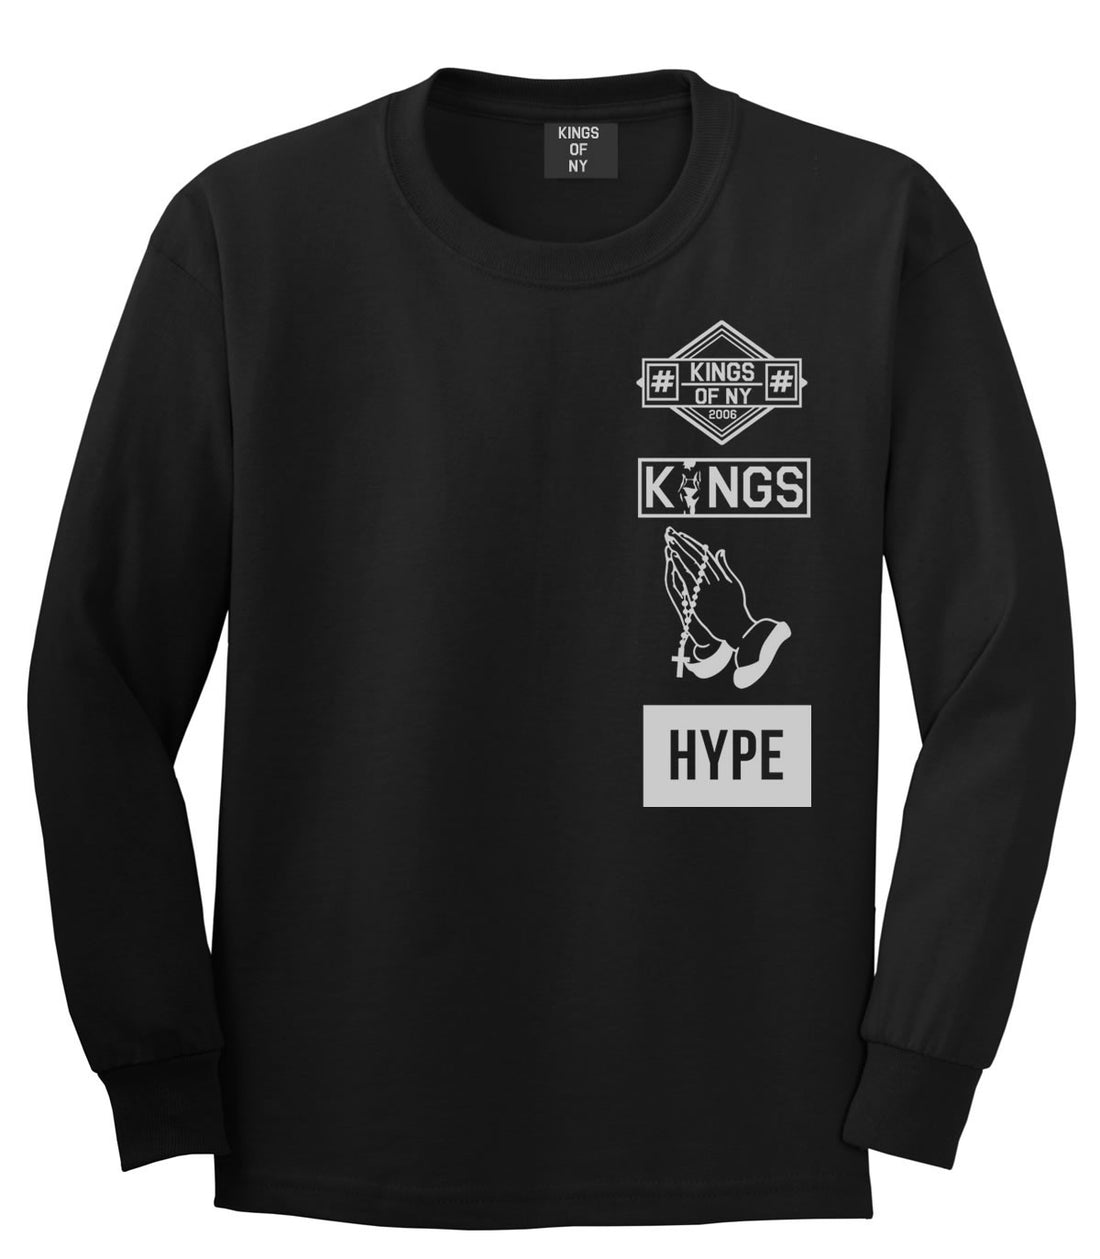 Prayer Hands Hype Left Logos Long Sleeve T-Shirt in Black By Kings Of NY